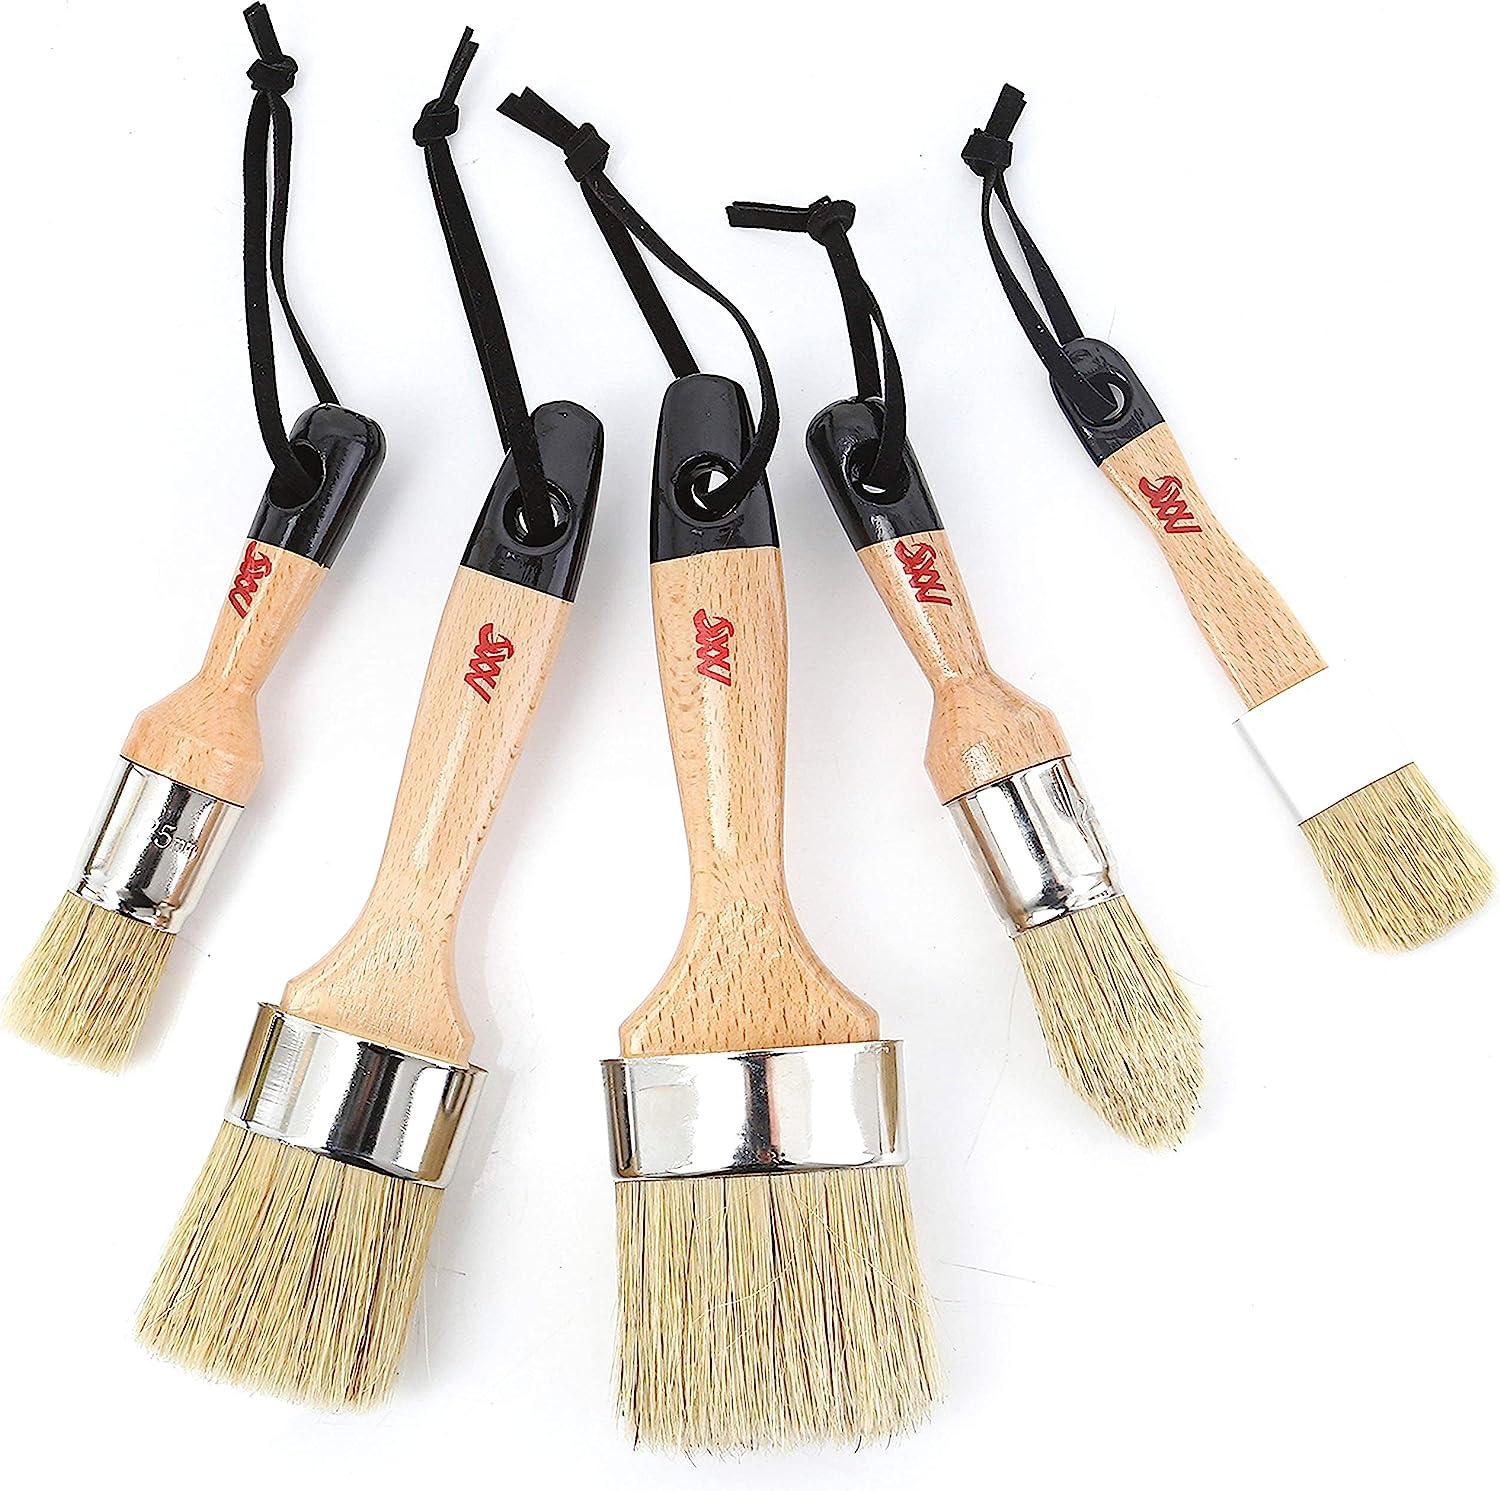 Chalk & Wax Paint Brush for Furniture - DIY Painting and Waxing Tool,Milk  Paint,Stencils,Natural Bristles (4Pcs)